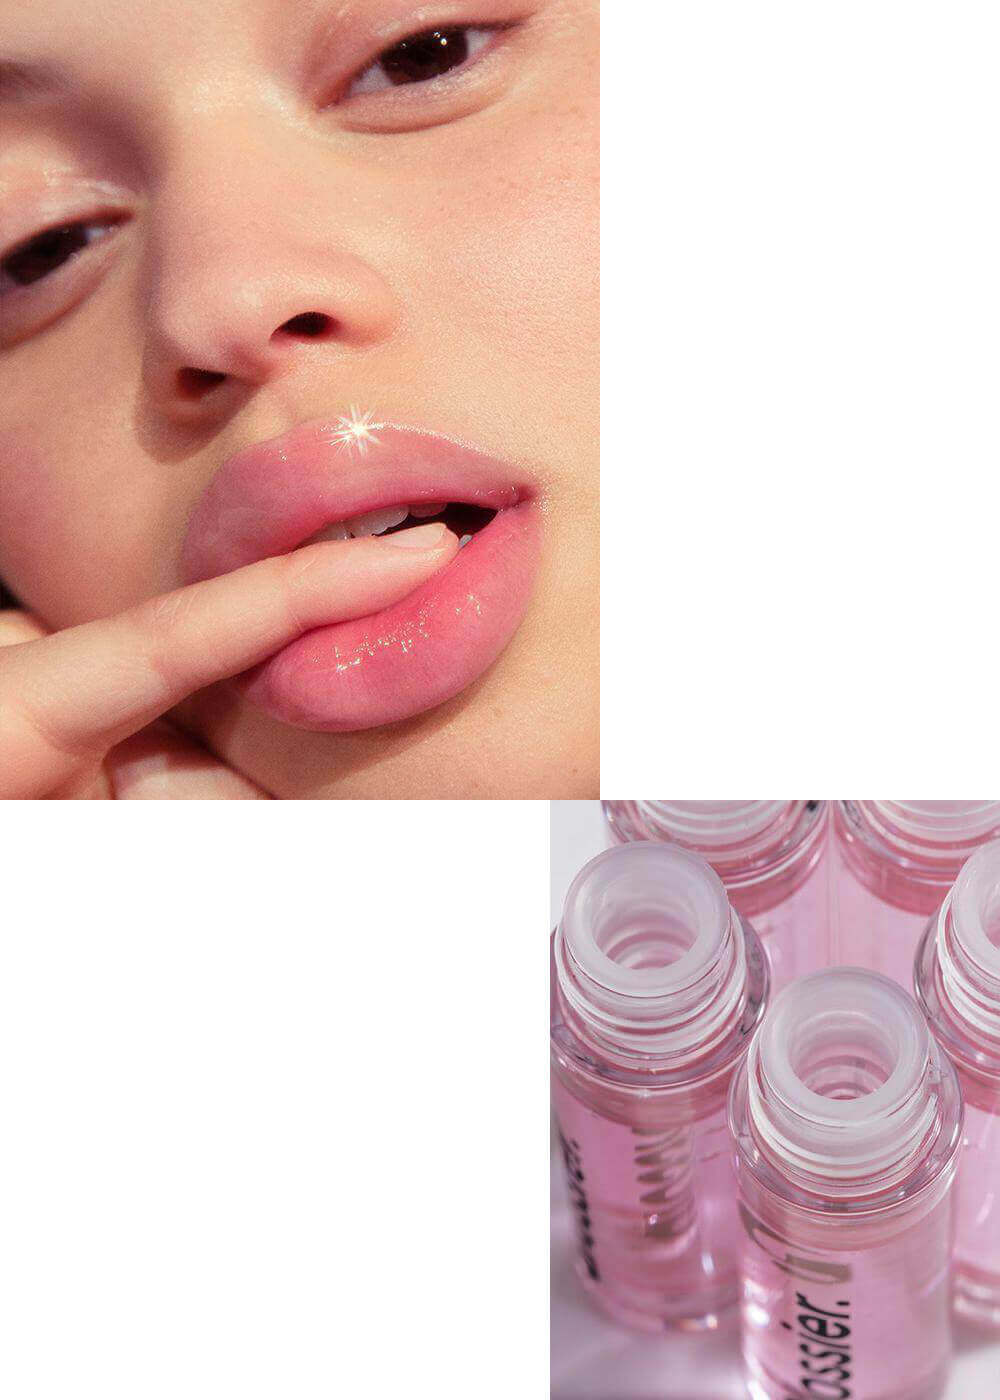 lip gloss: hypoallergenic, dermatologist tested, paraben free, alcohol free, cruelty free